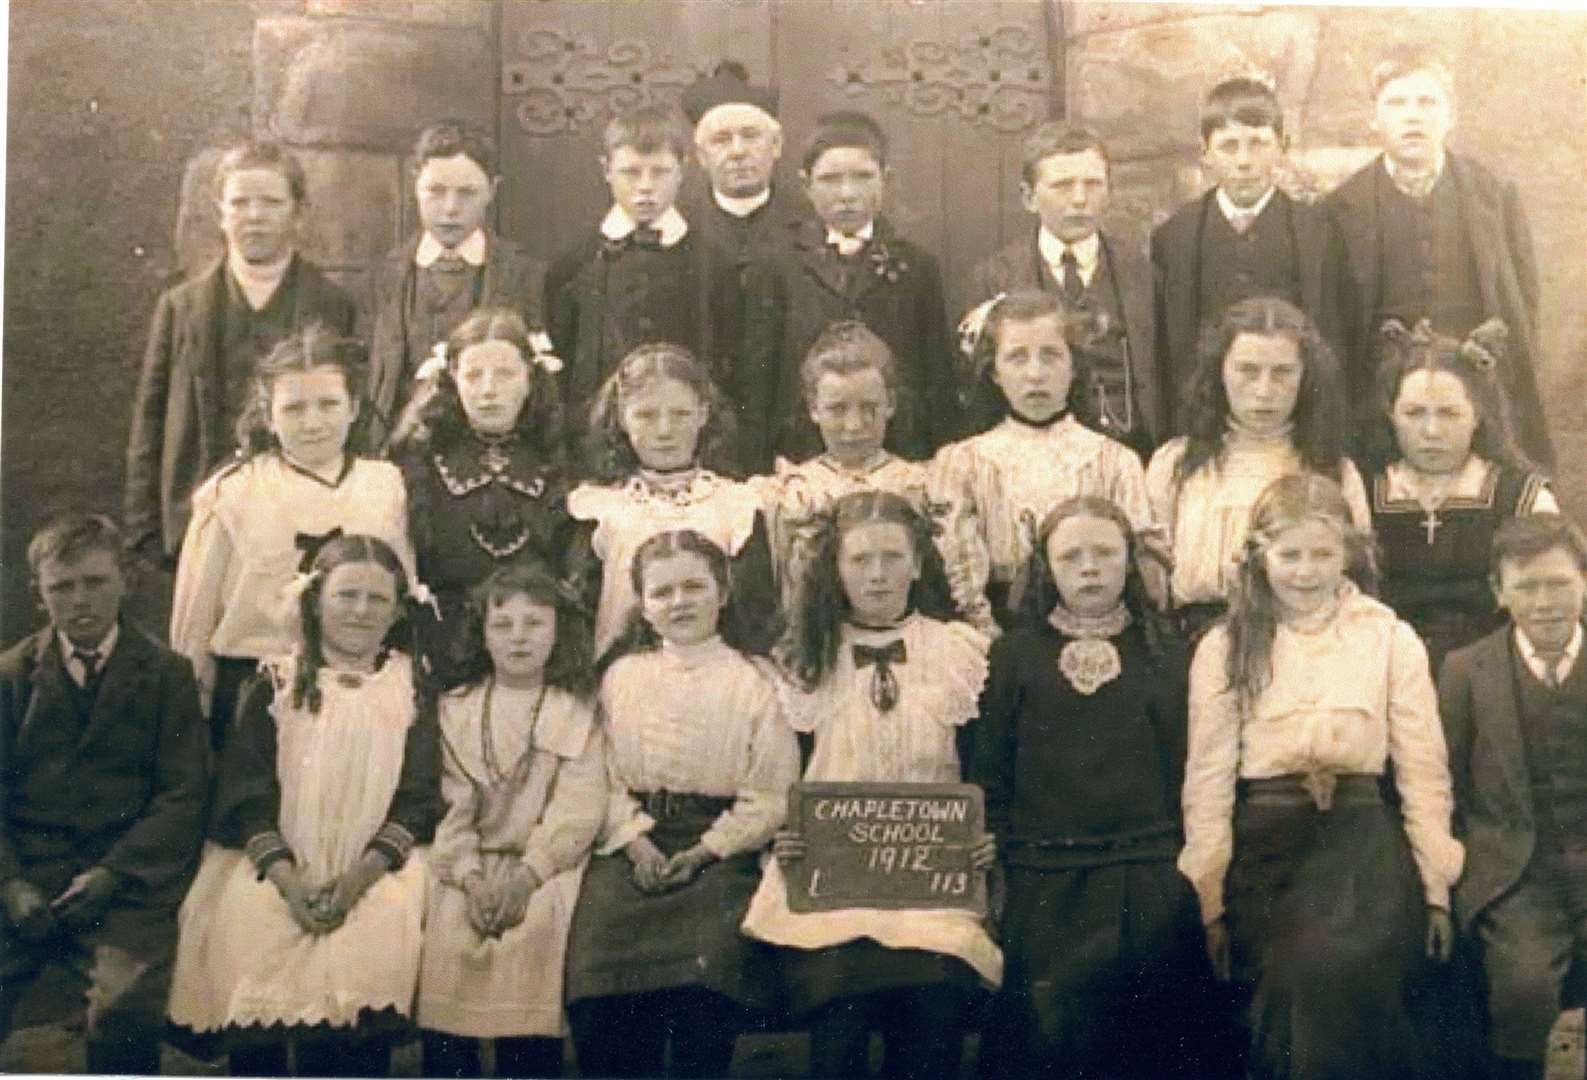 Chapeltown School pupils, 1912, in front of the Chapel at Chapeltown, with priest. Photo: M Hogg / Tomintoul & Glenlivet Digital Archive